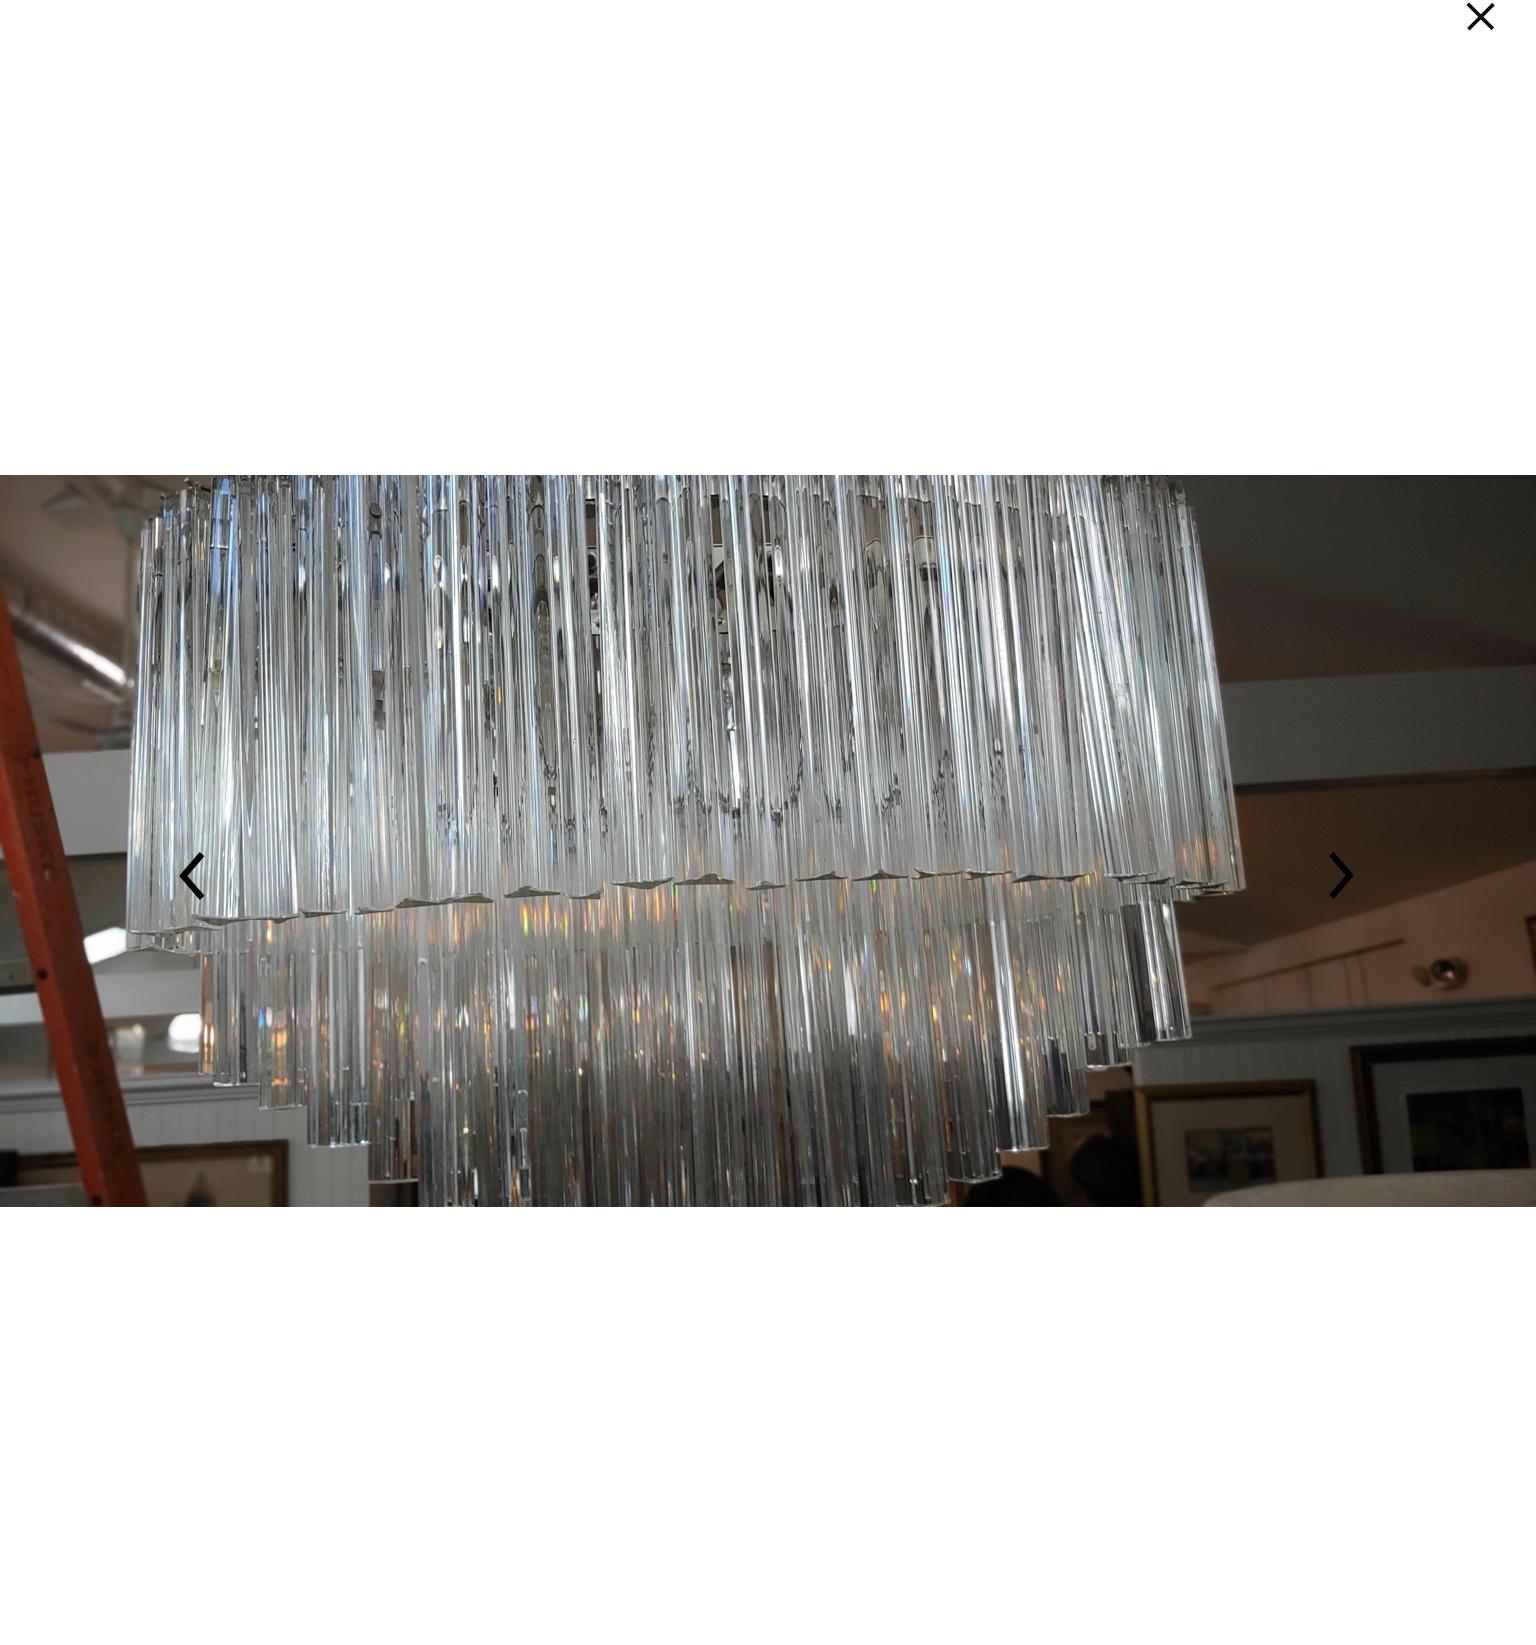 1970s Mid-Century Modern Camer Murano Glass Sculpture Chandelier For Sale 1